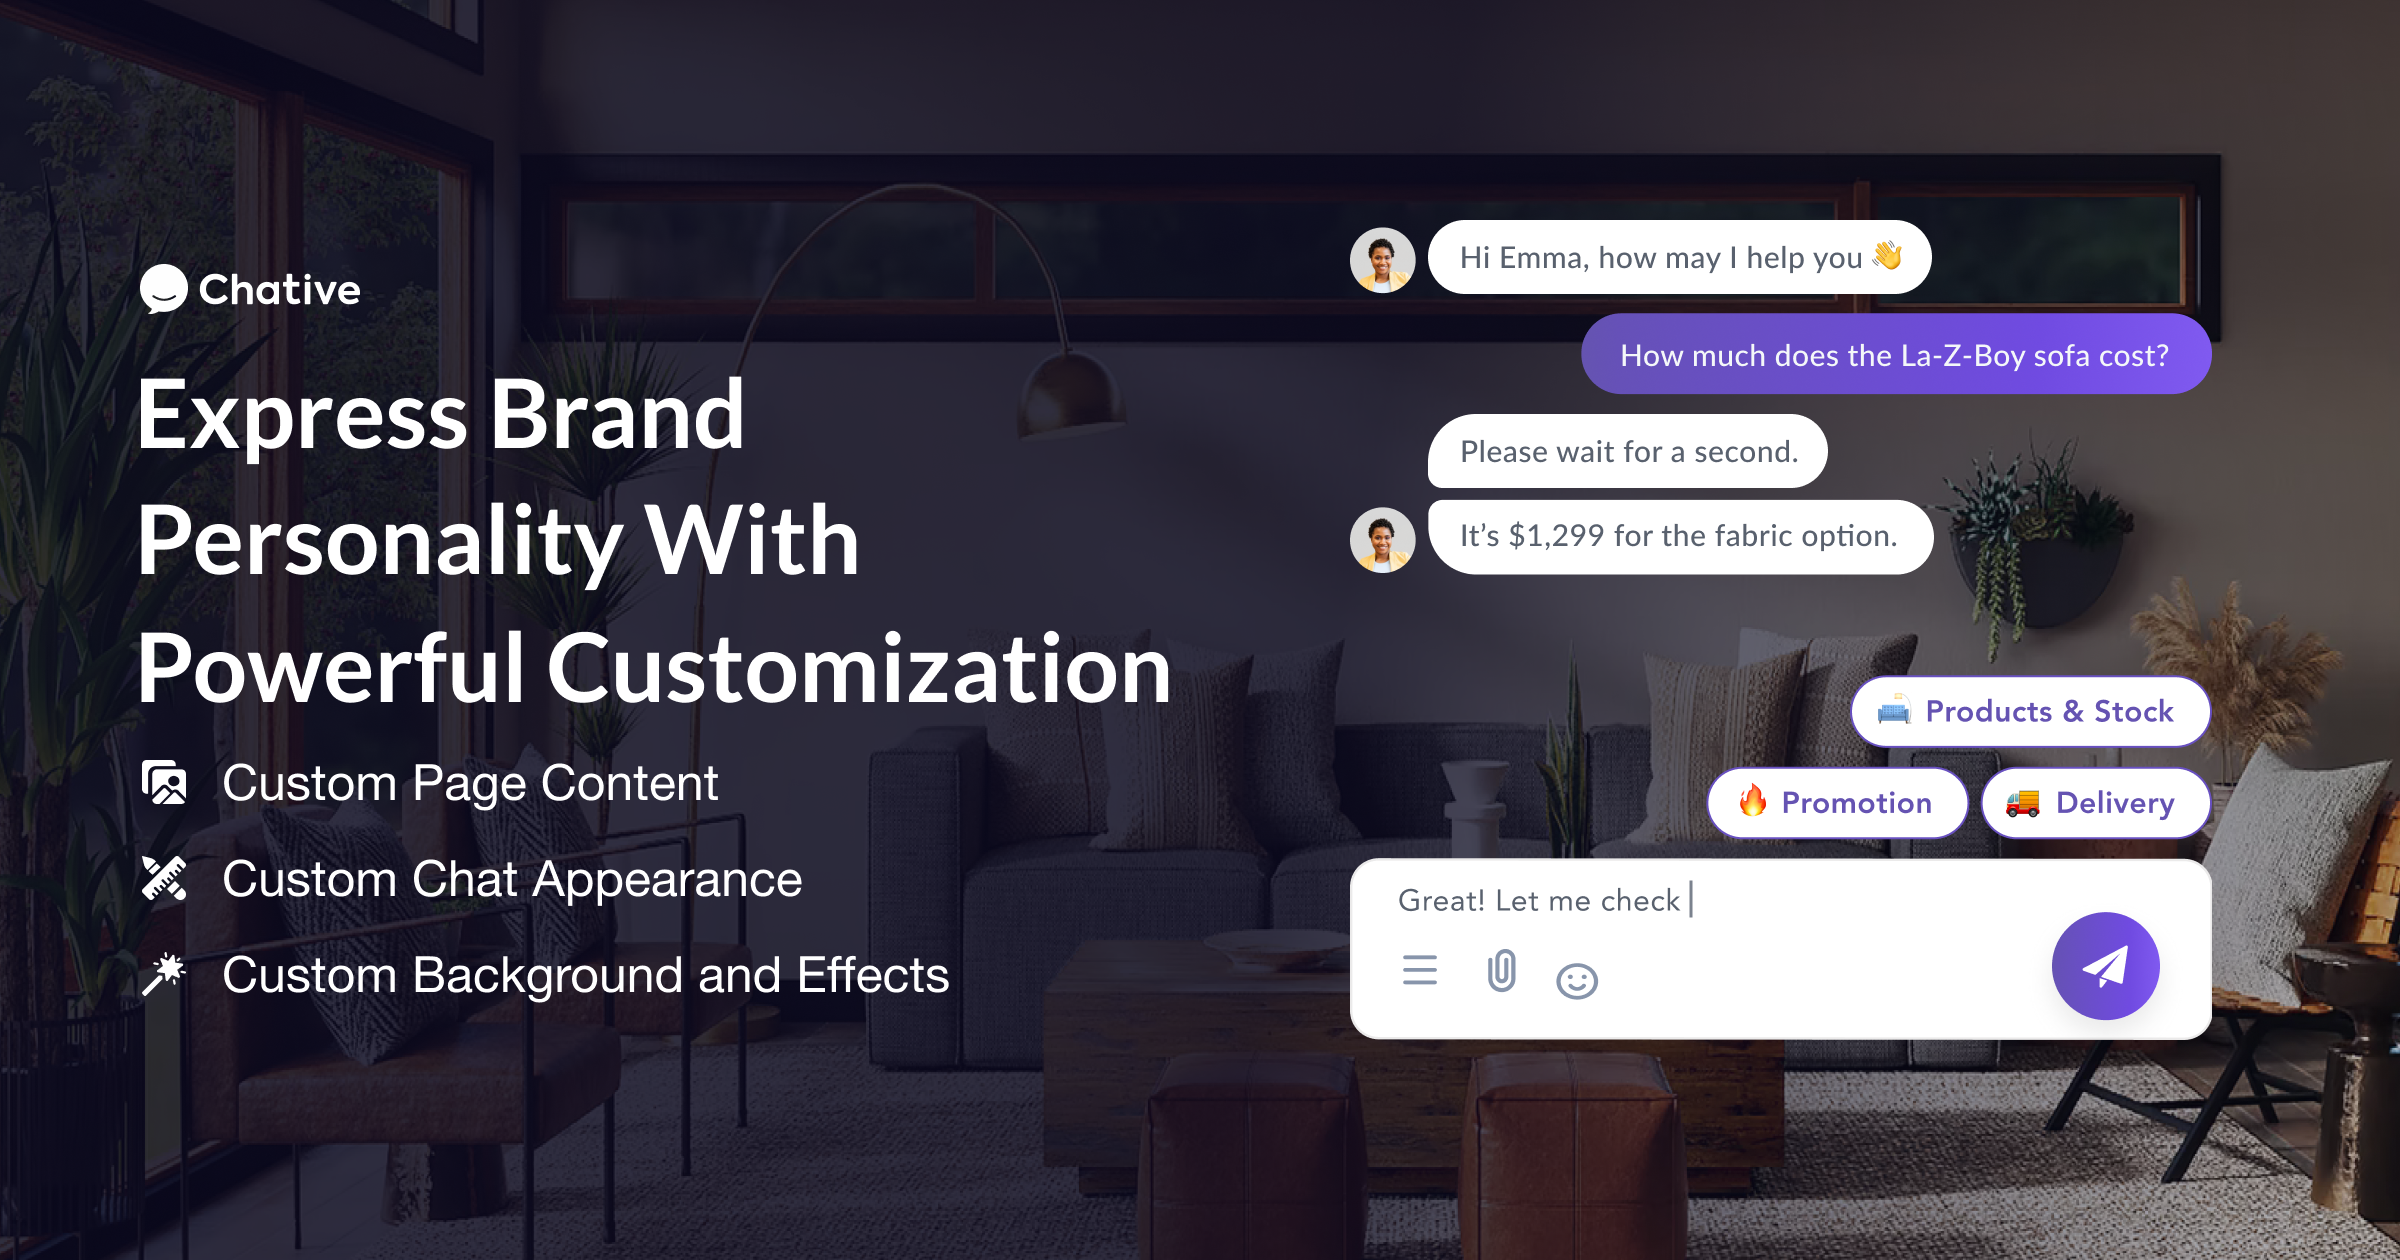 With Chative.IO, you can integrate a customizable live chat into your website. This enables real-time engagement with your website visitors, offering instant assistance and support.